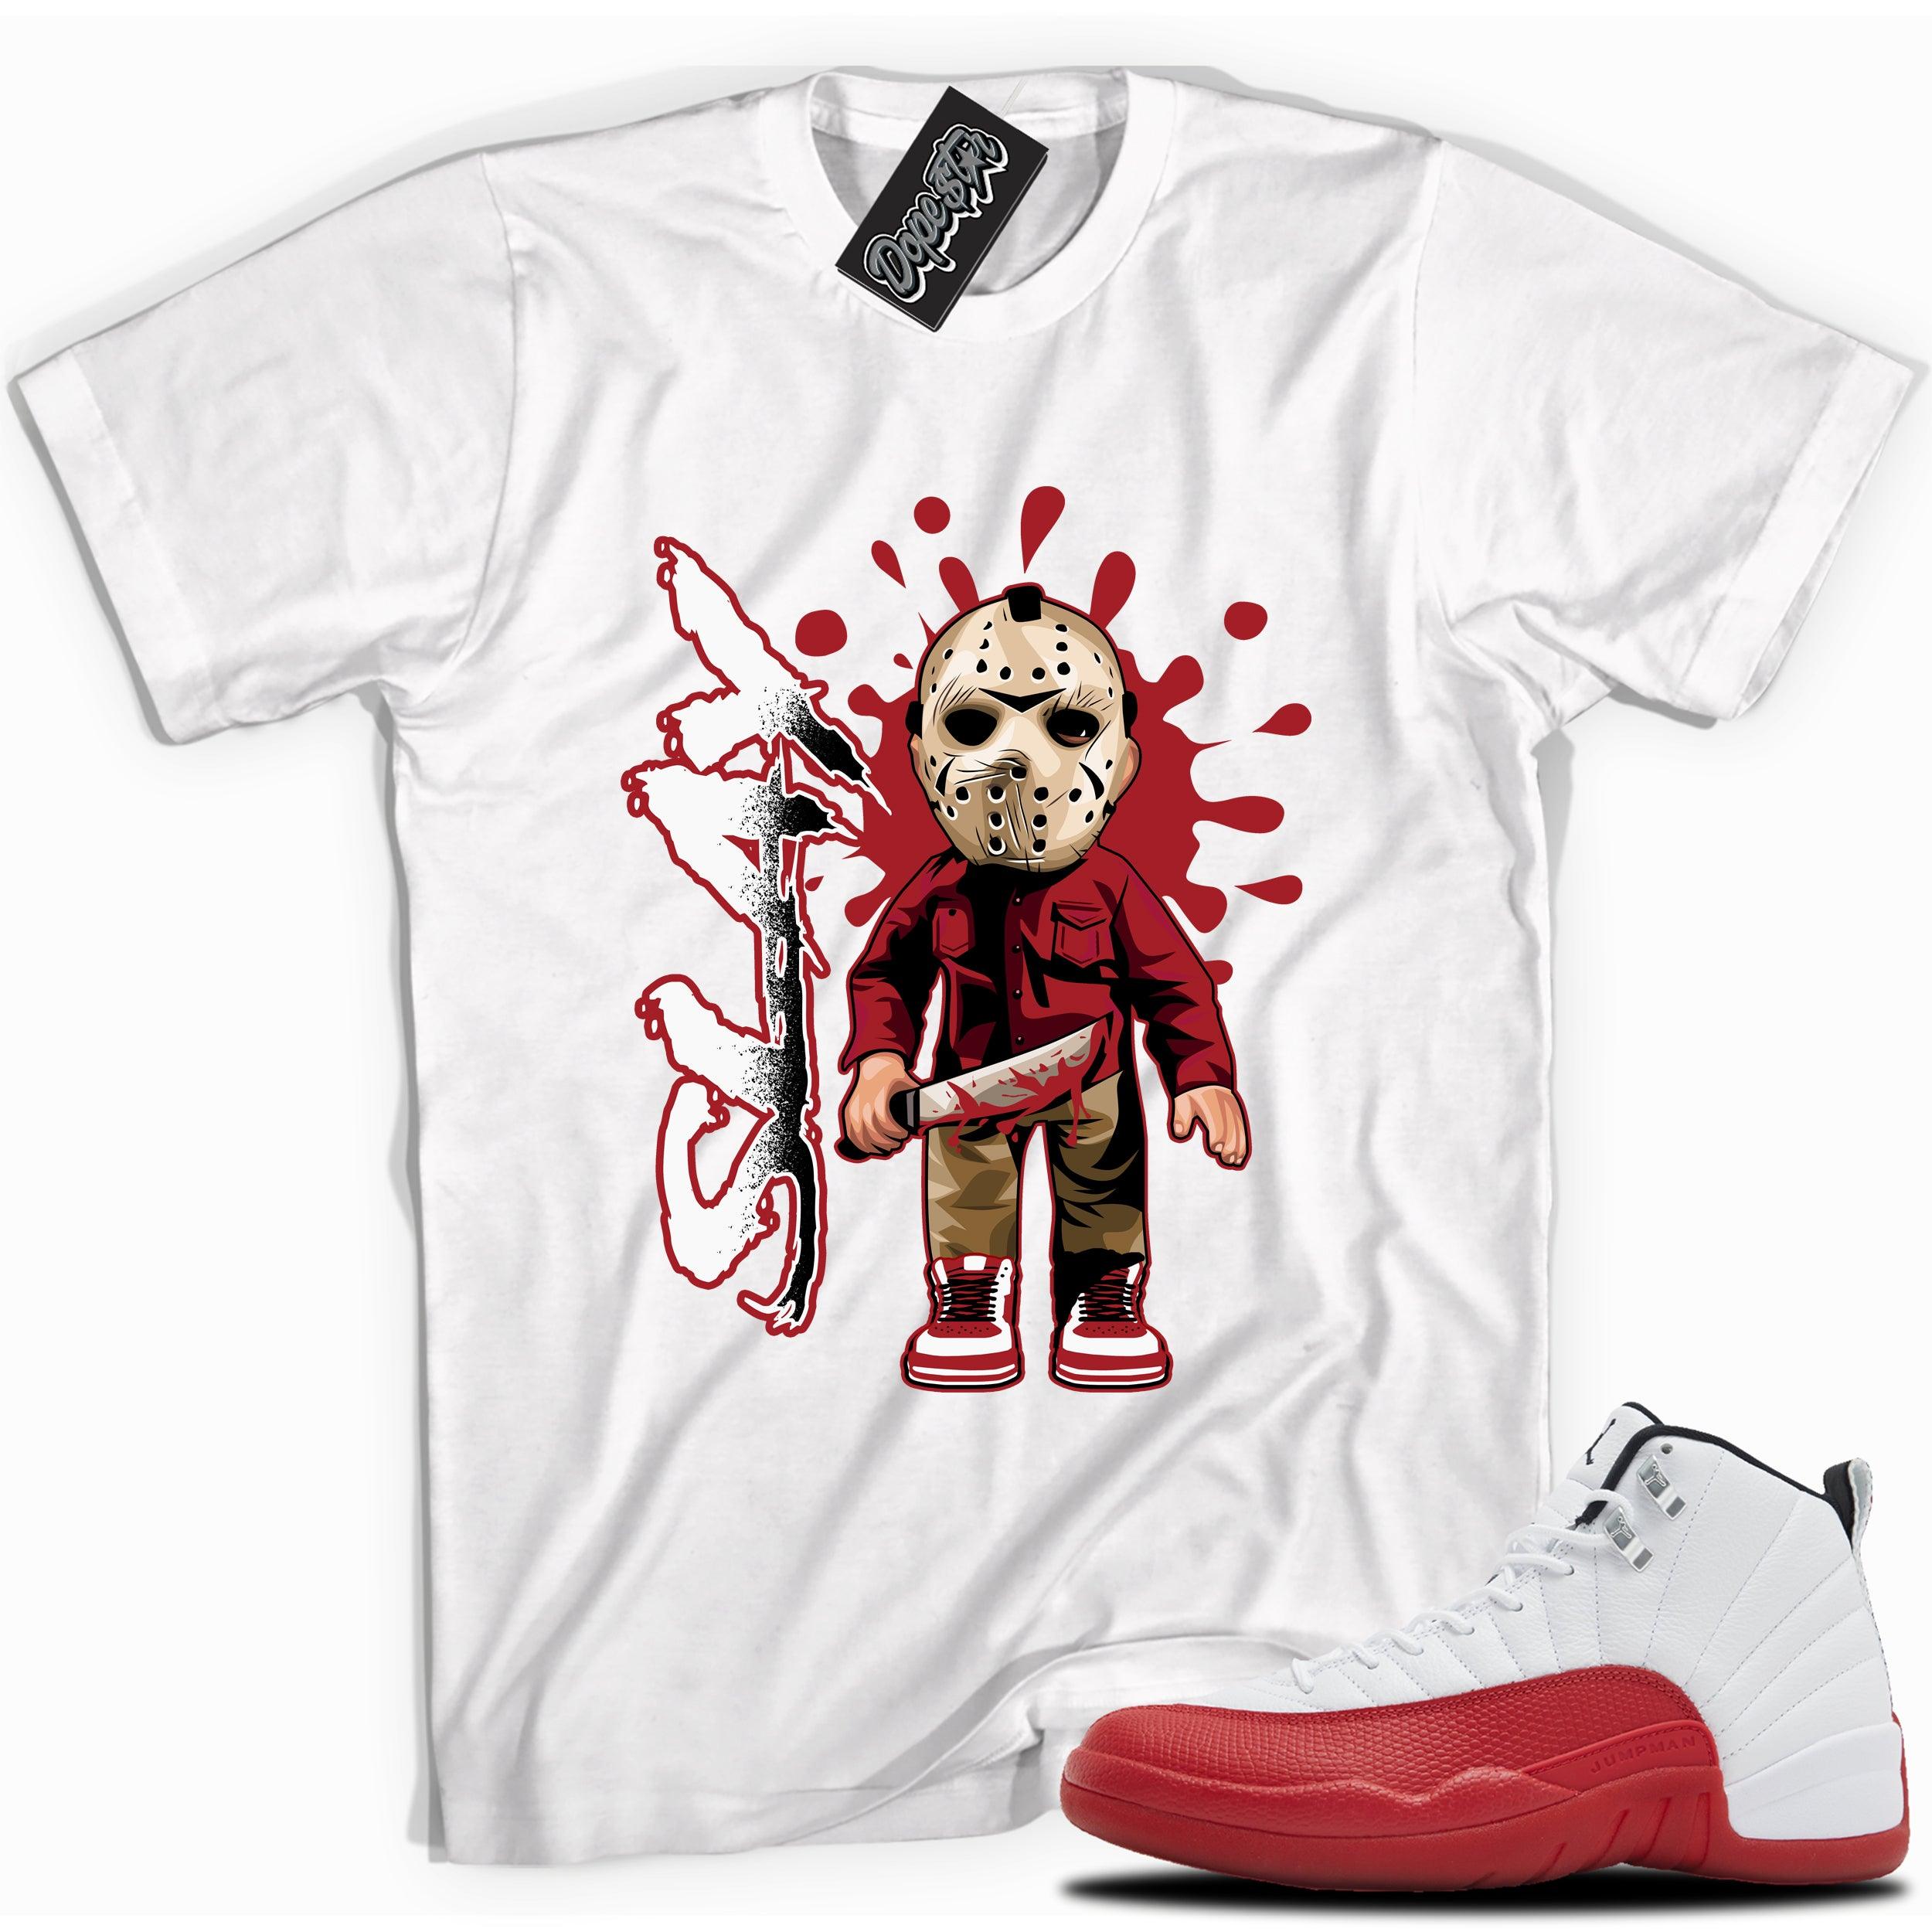 Cool White graphic tee with “SLAY” print, that perfectly matches Air Jordan 12 Retro Cherry Red 2023 red and white sneakers